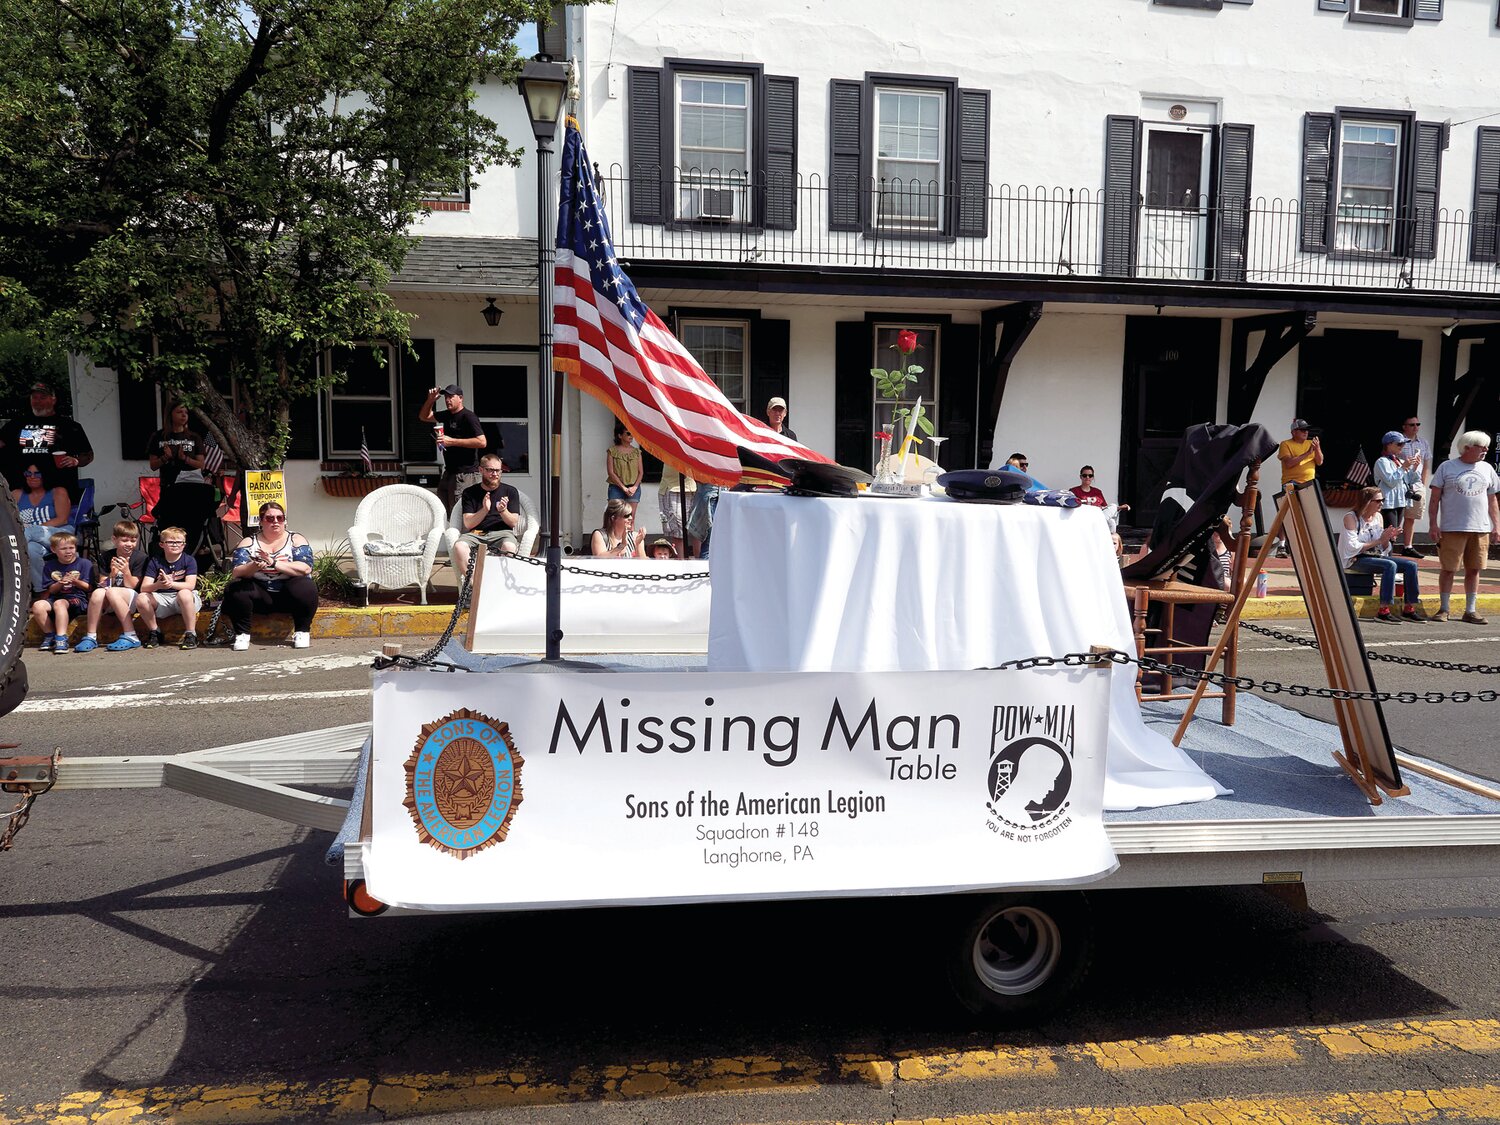 The Missing Man Table is pulled along the parade route.